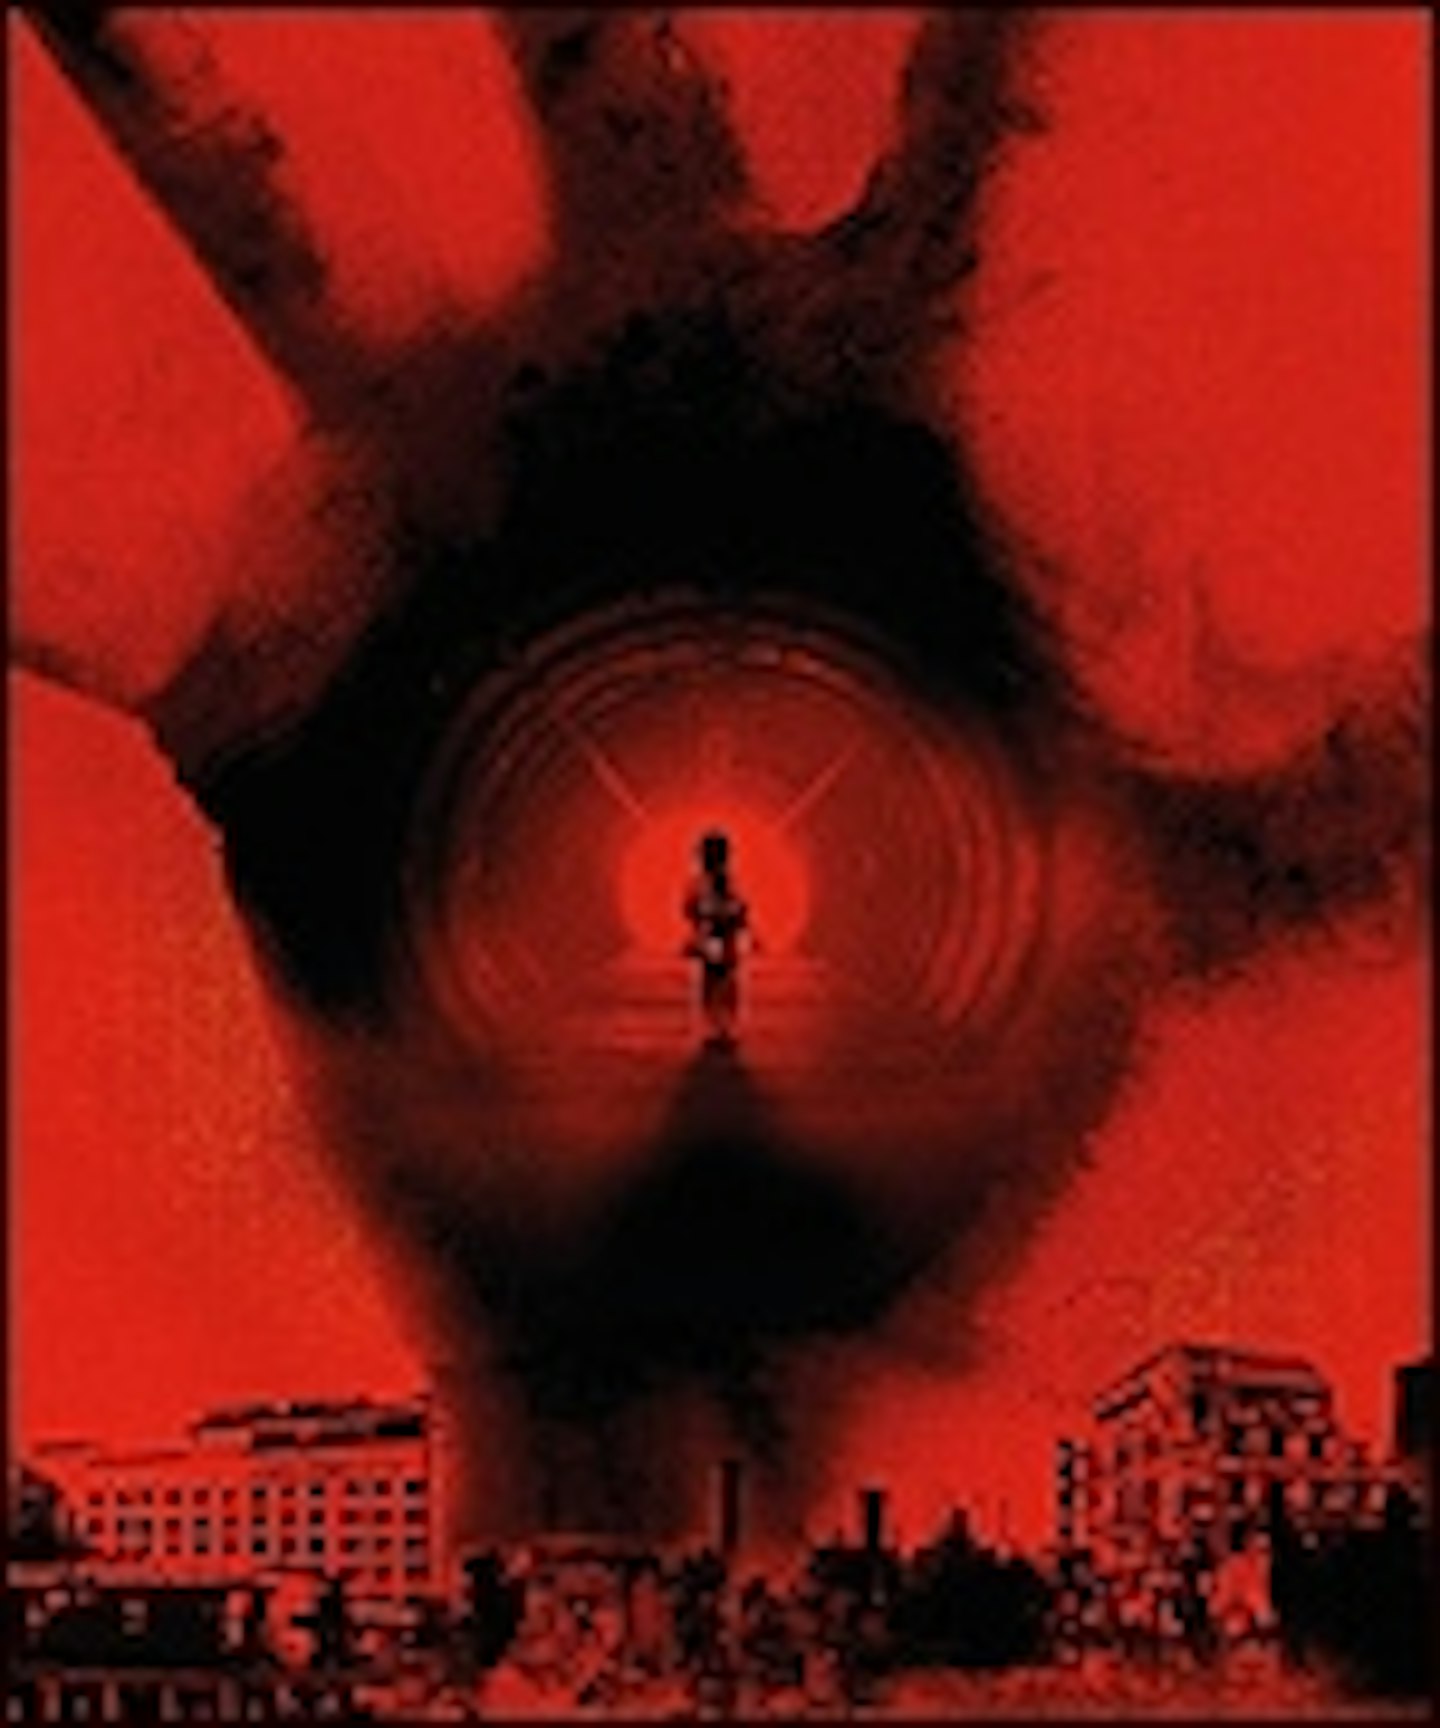 Chernobyl Diaries Poster Arrives